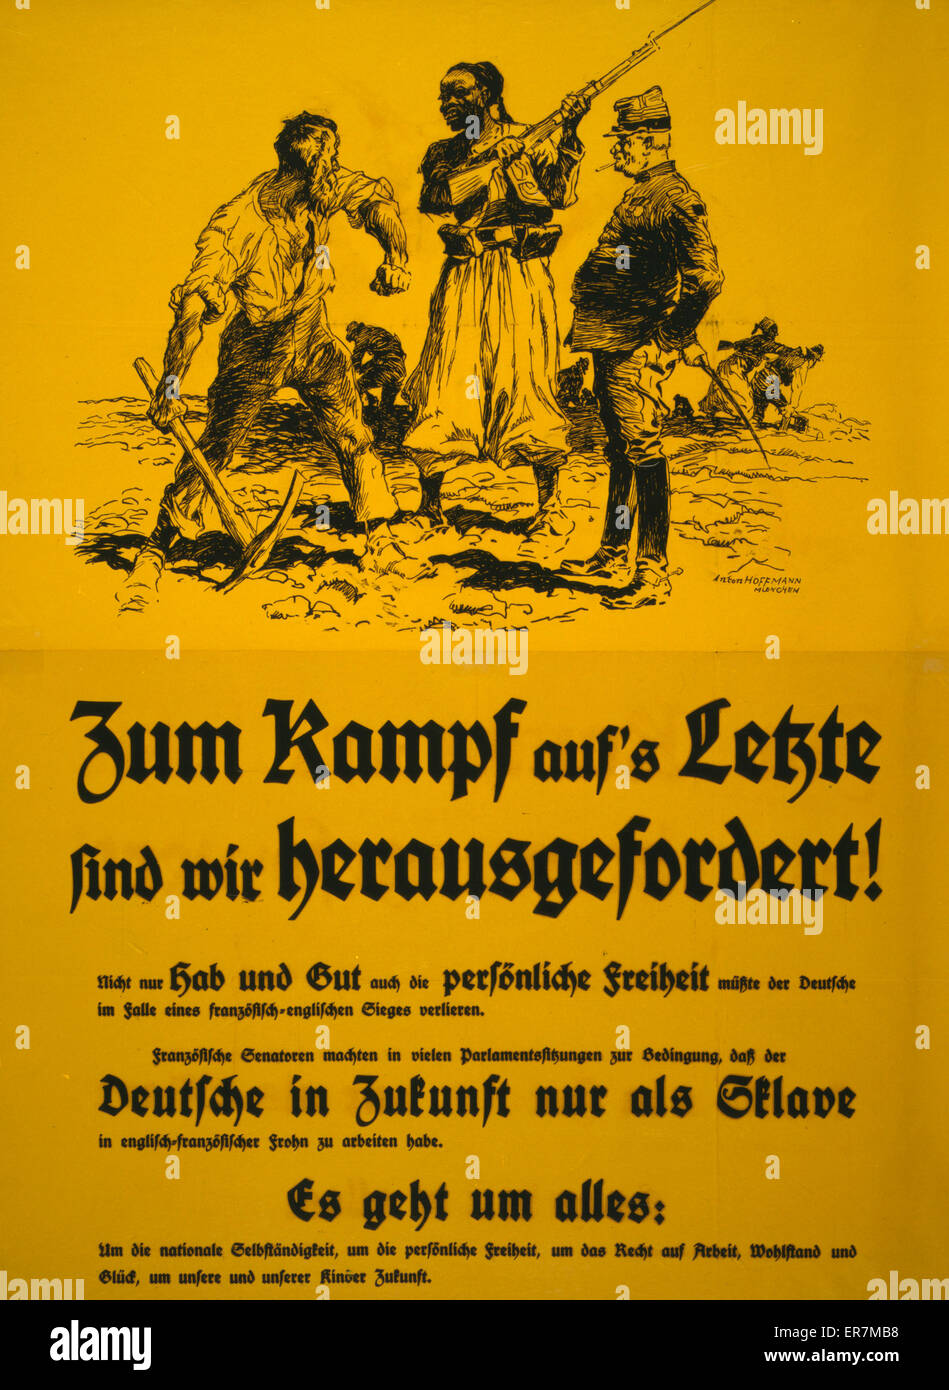 Zum Kampf auf's Letzte sind wir herausgefordert!. Poster shows German men working in a field being threatened by African soldiers as a French officer looks on. Text encourages people to fight to the last since everything would be lost in a French-English Stock Photo